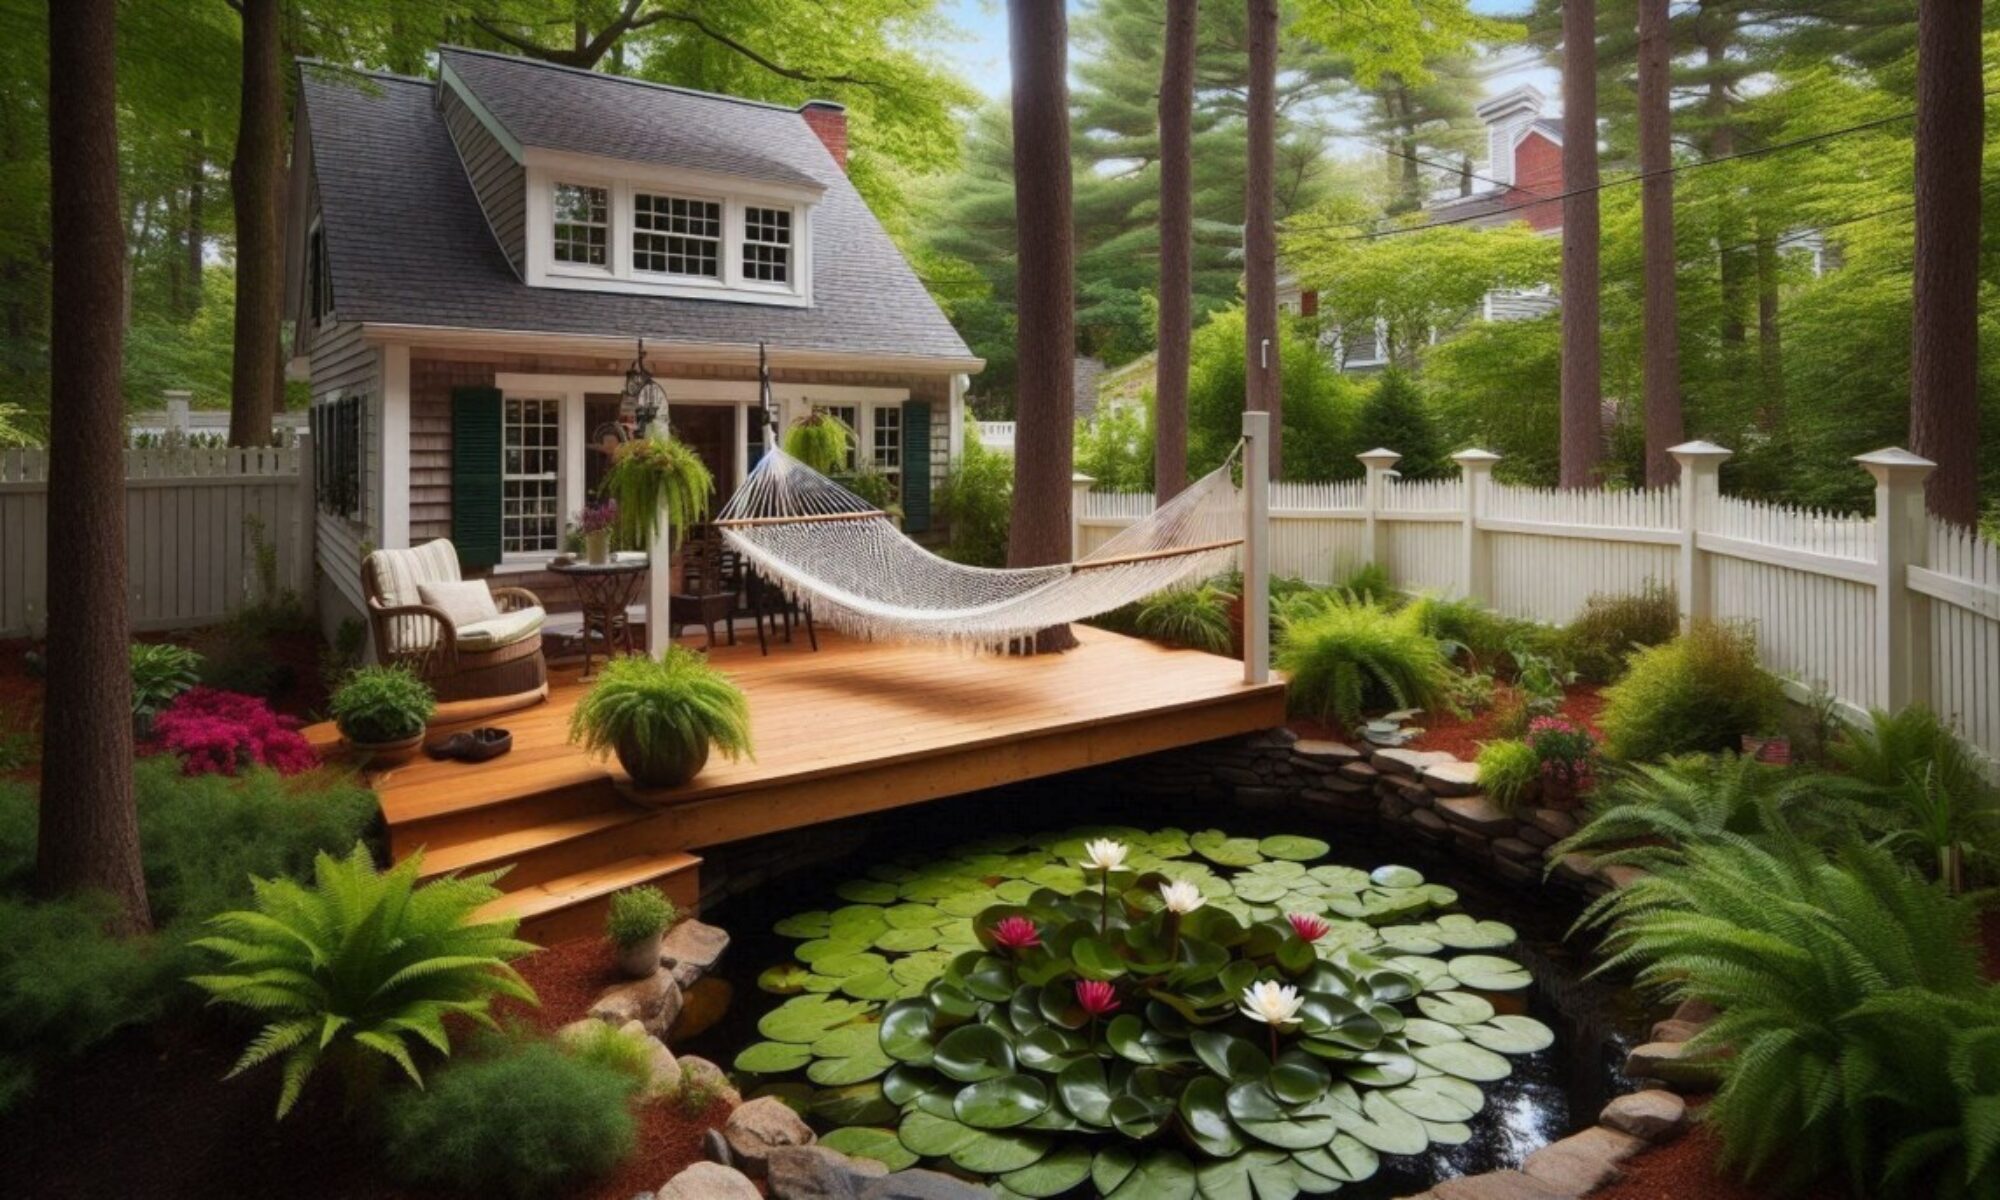 A Backyard Oasis - This image created by AI for Lew Corcoran, Real Estate Agent, Real Estate Photographer, Home Stager, and FAA Licensed Drone Pilot